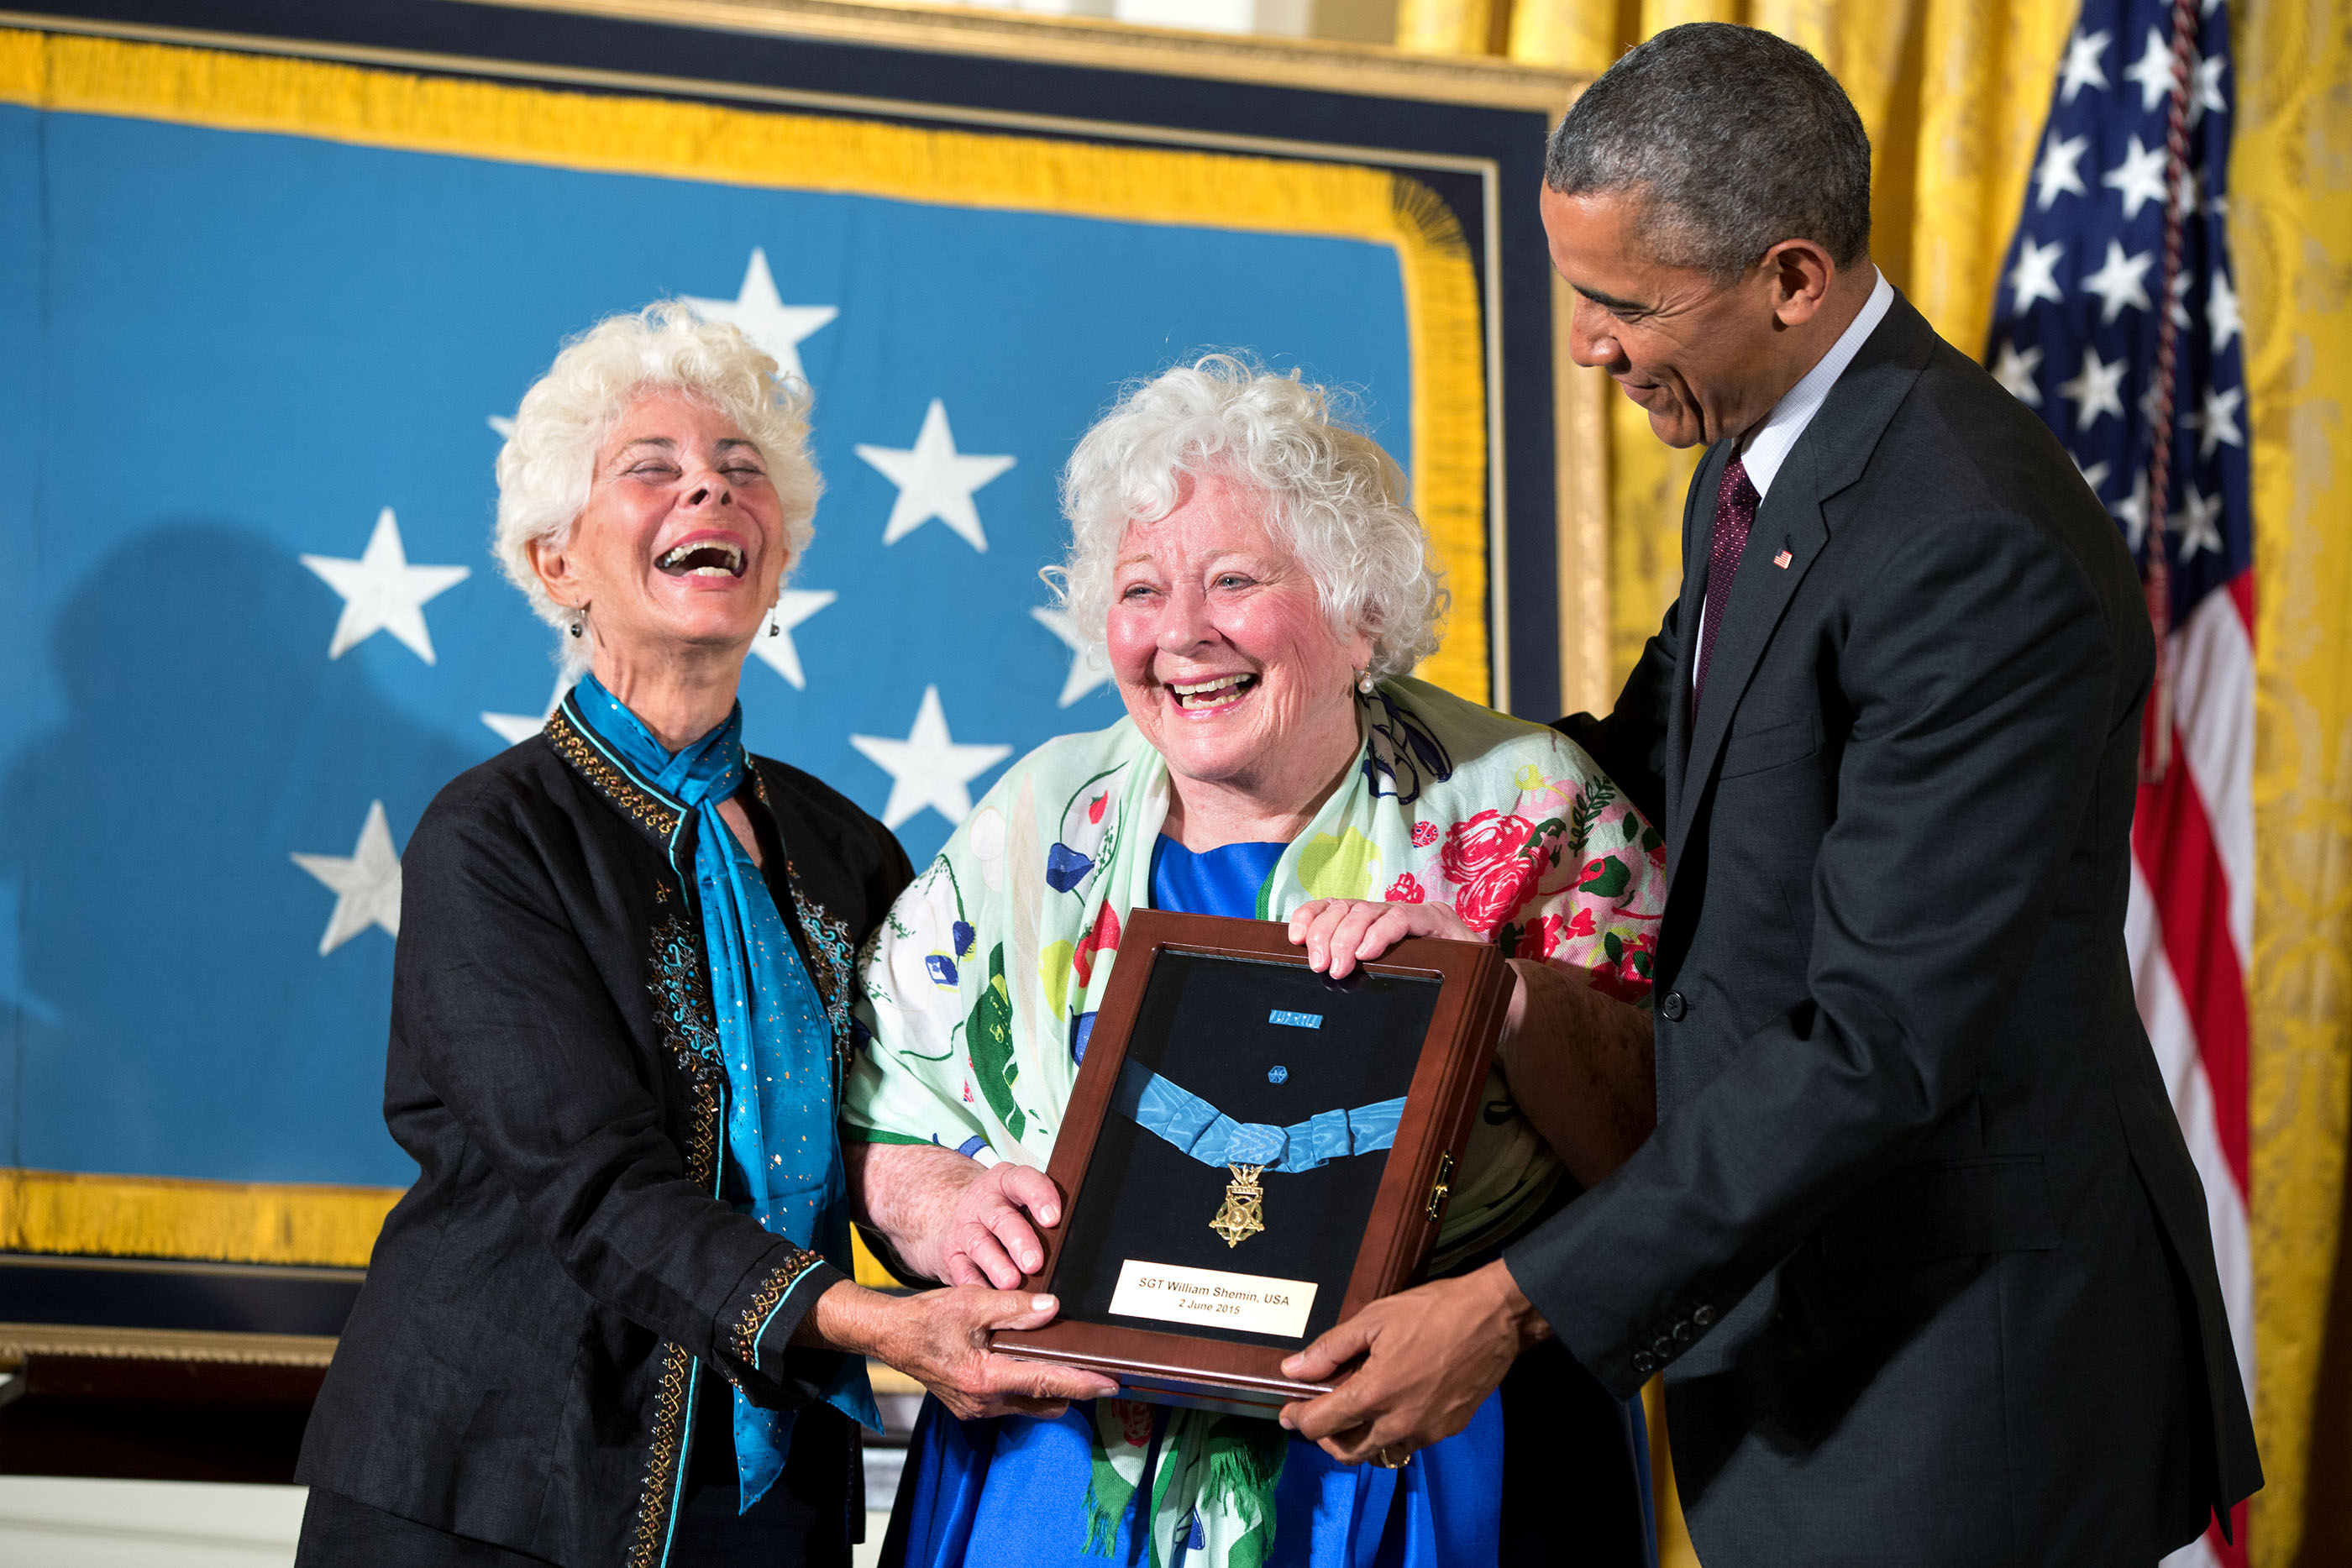 Ina Judith Bass (left) and Elise Shemin-Roth react after accepting the Medal of Honor from President Barack Obama on behalf of their father Army Sergeant William Shemin given posthumously for conspicuous gallantry during World War I, at a ceremony in the 